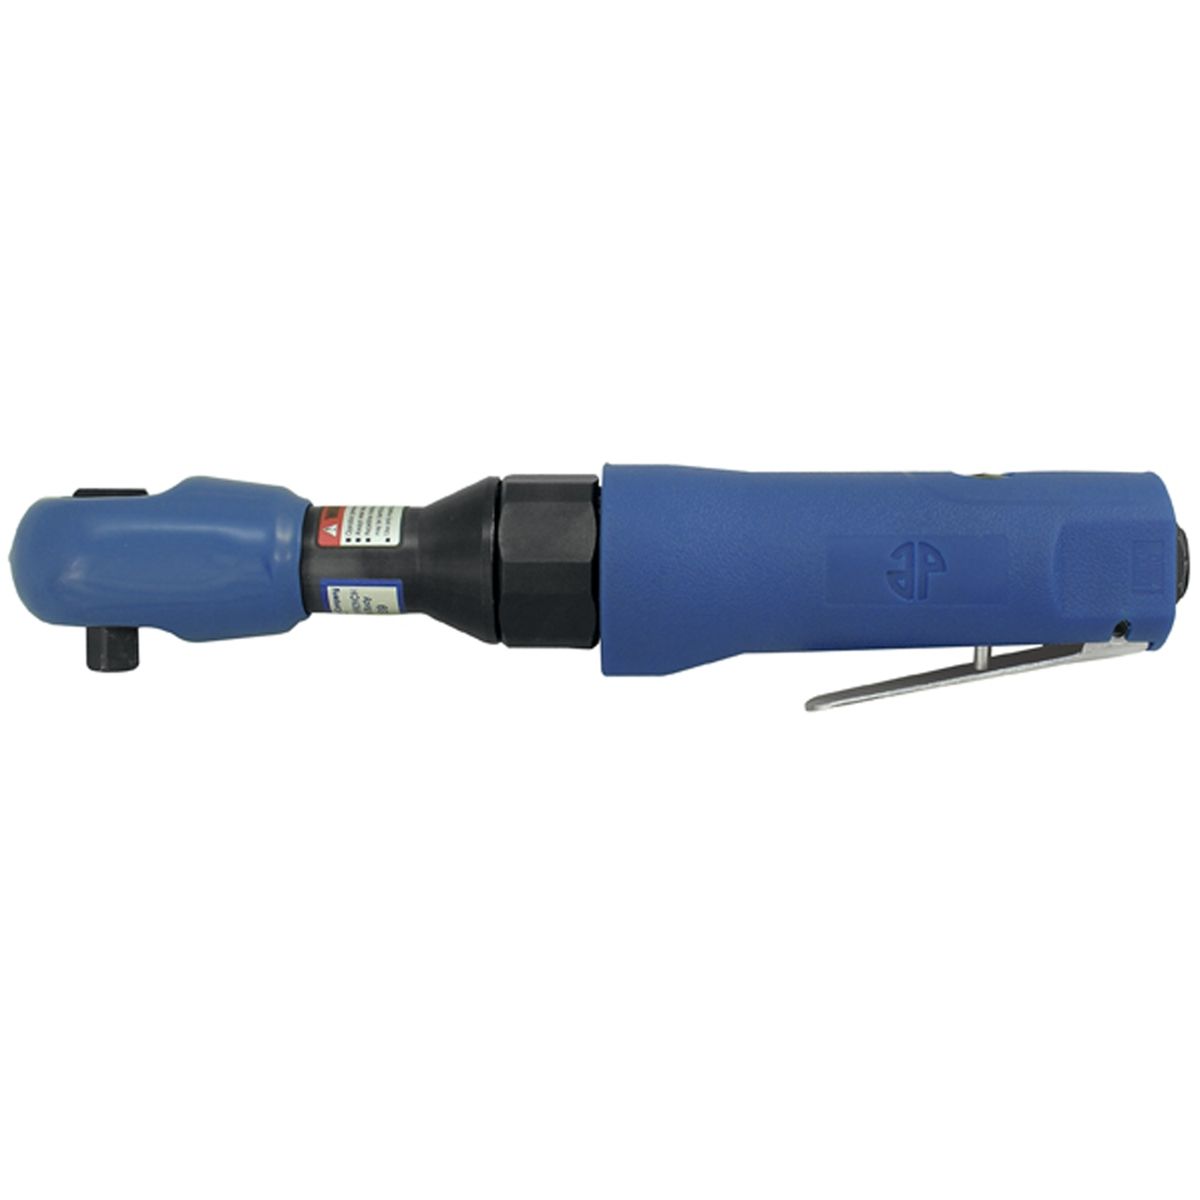 3/8" Air Ratchet Wrench with Blue Rubber Sleeve